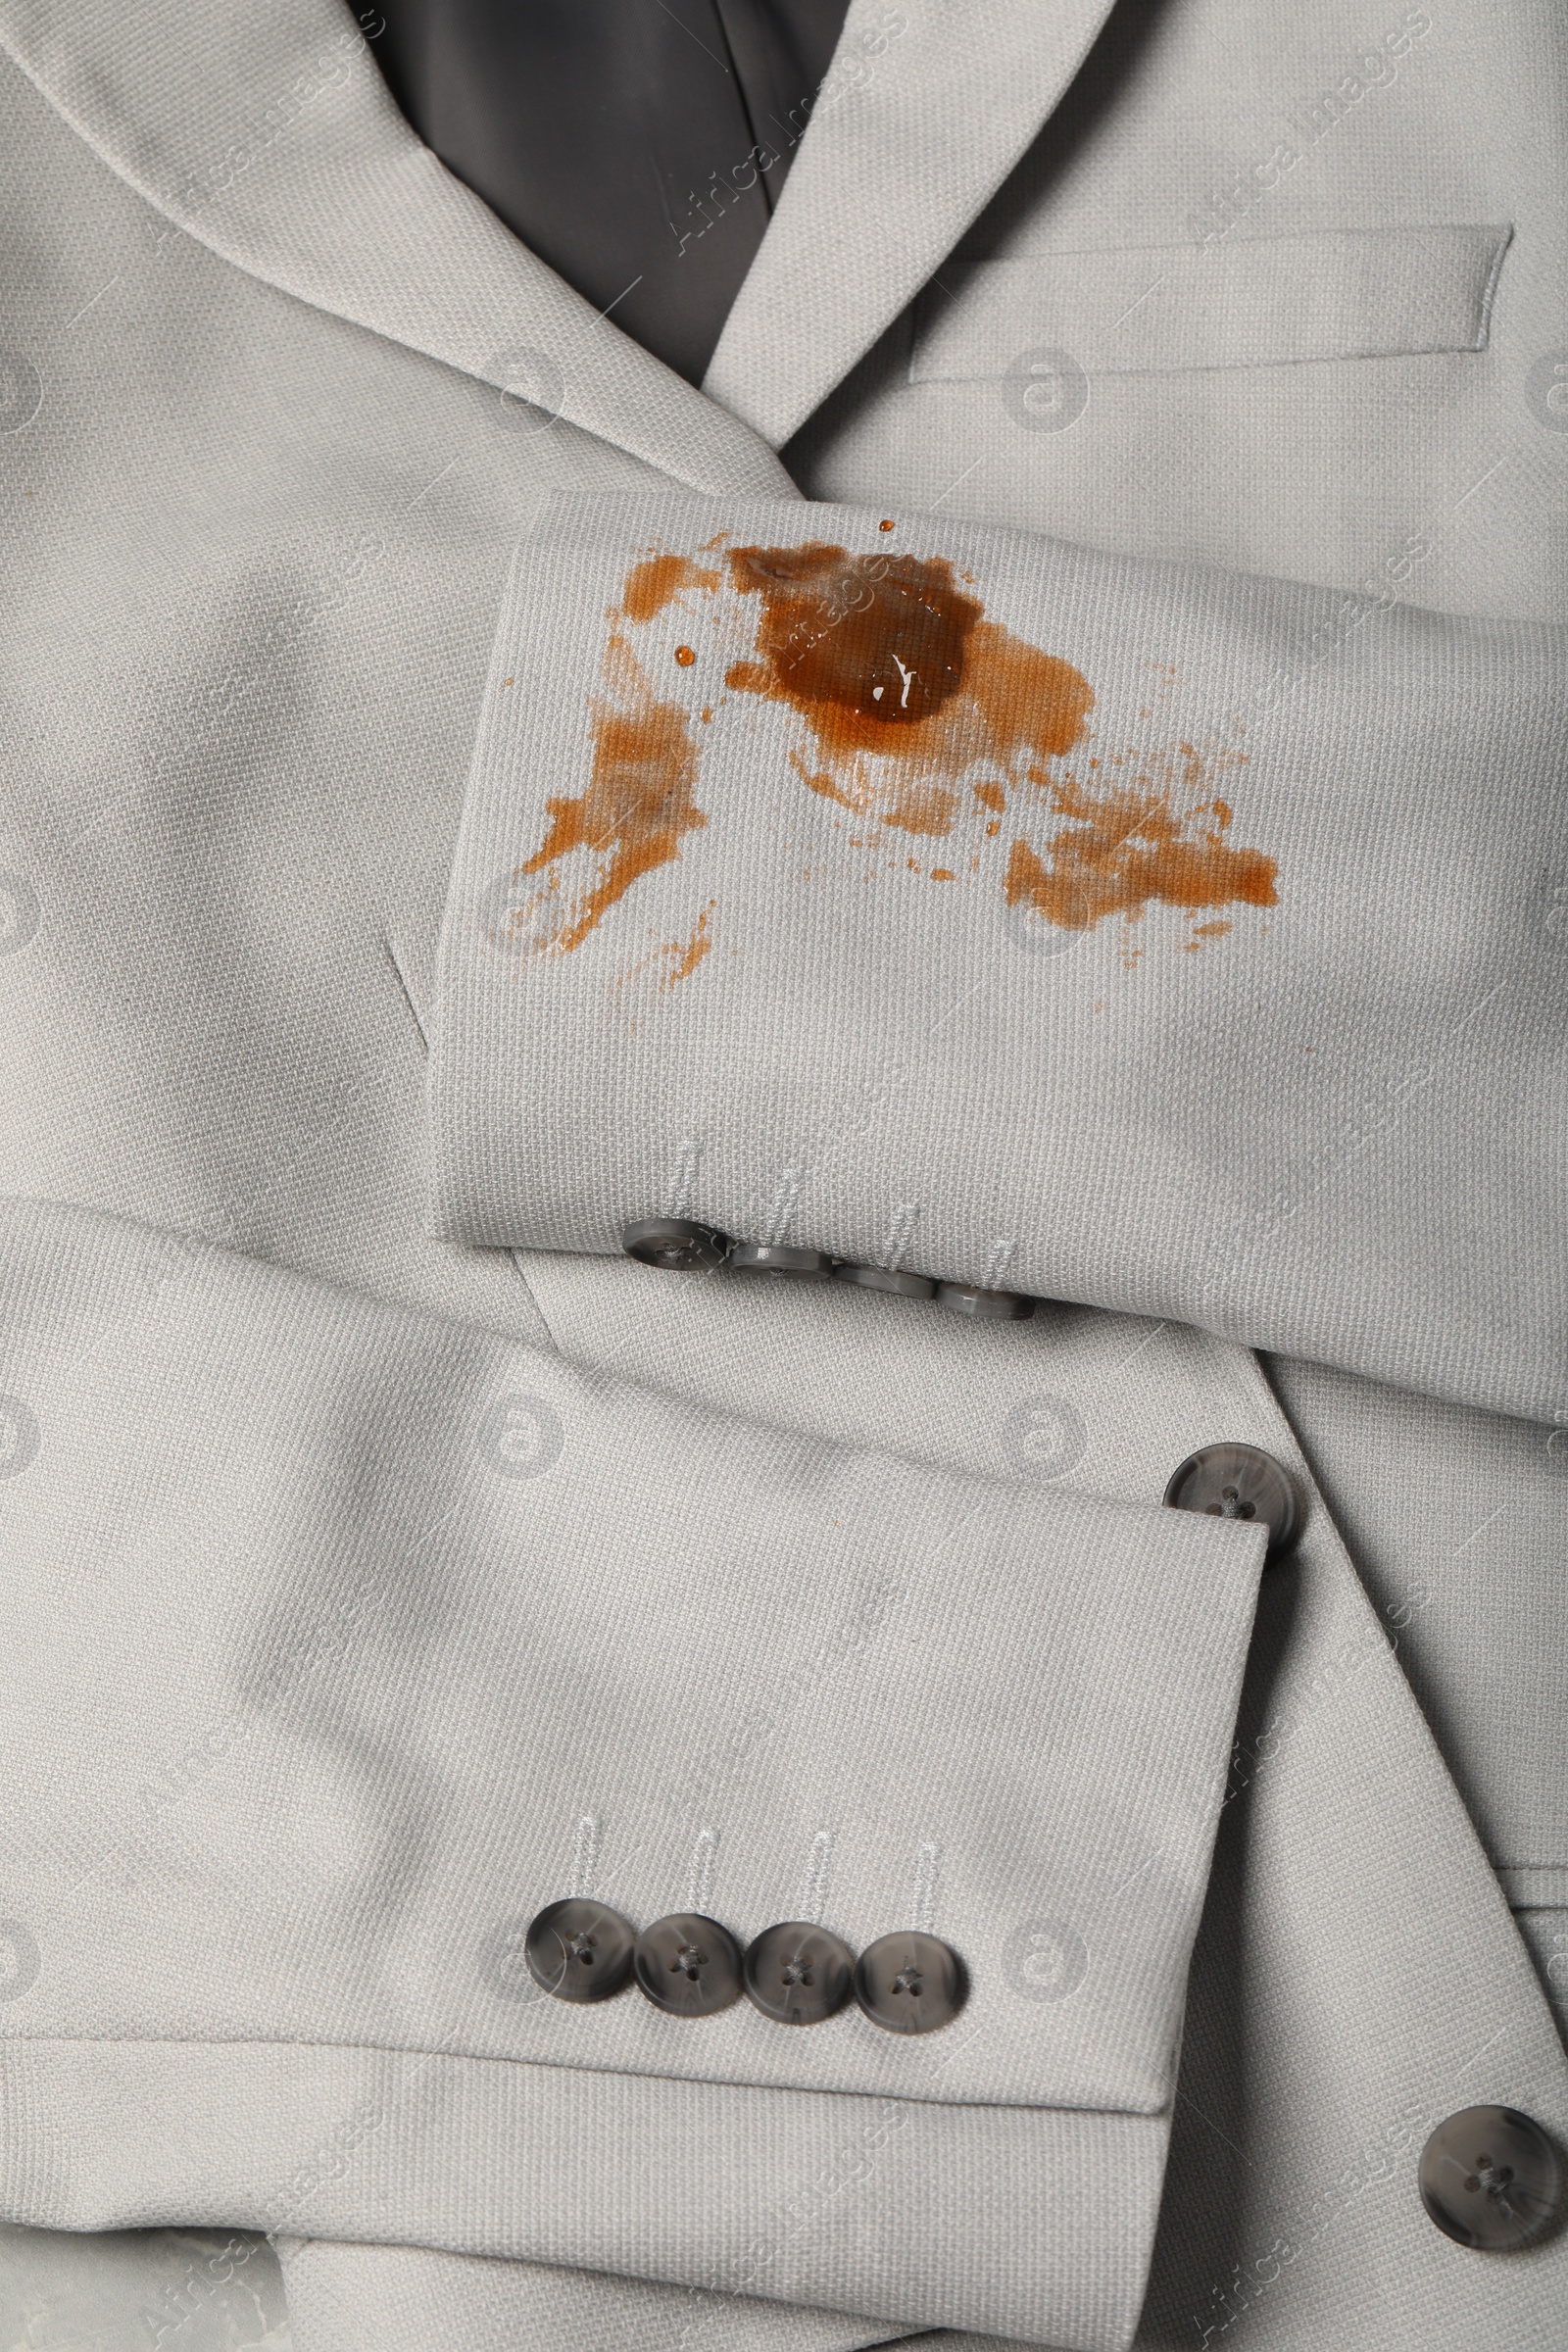 Photo of Dirty jacket with stain of coffee on light grey surface, top view